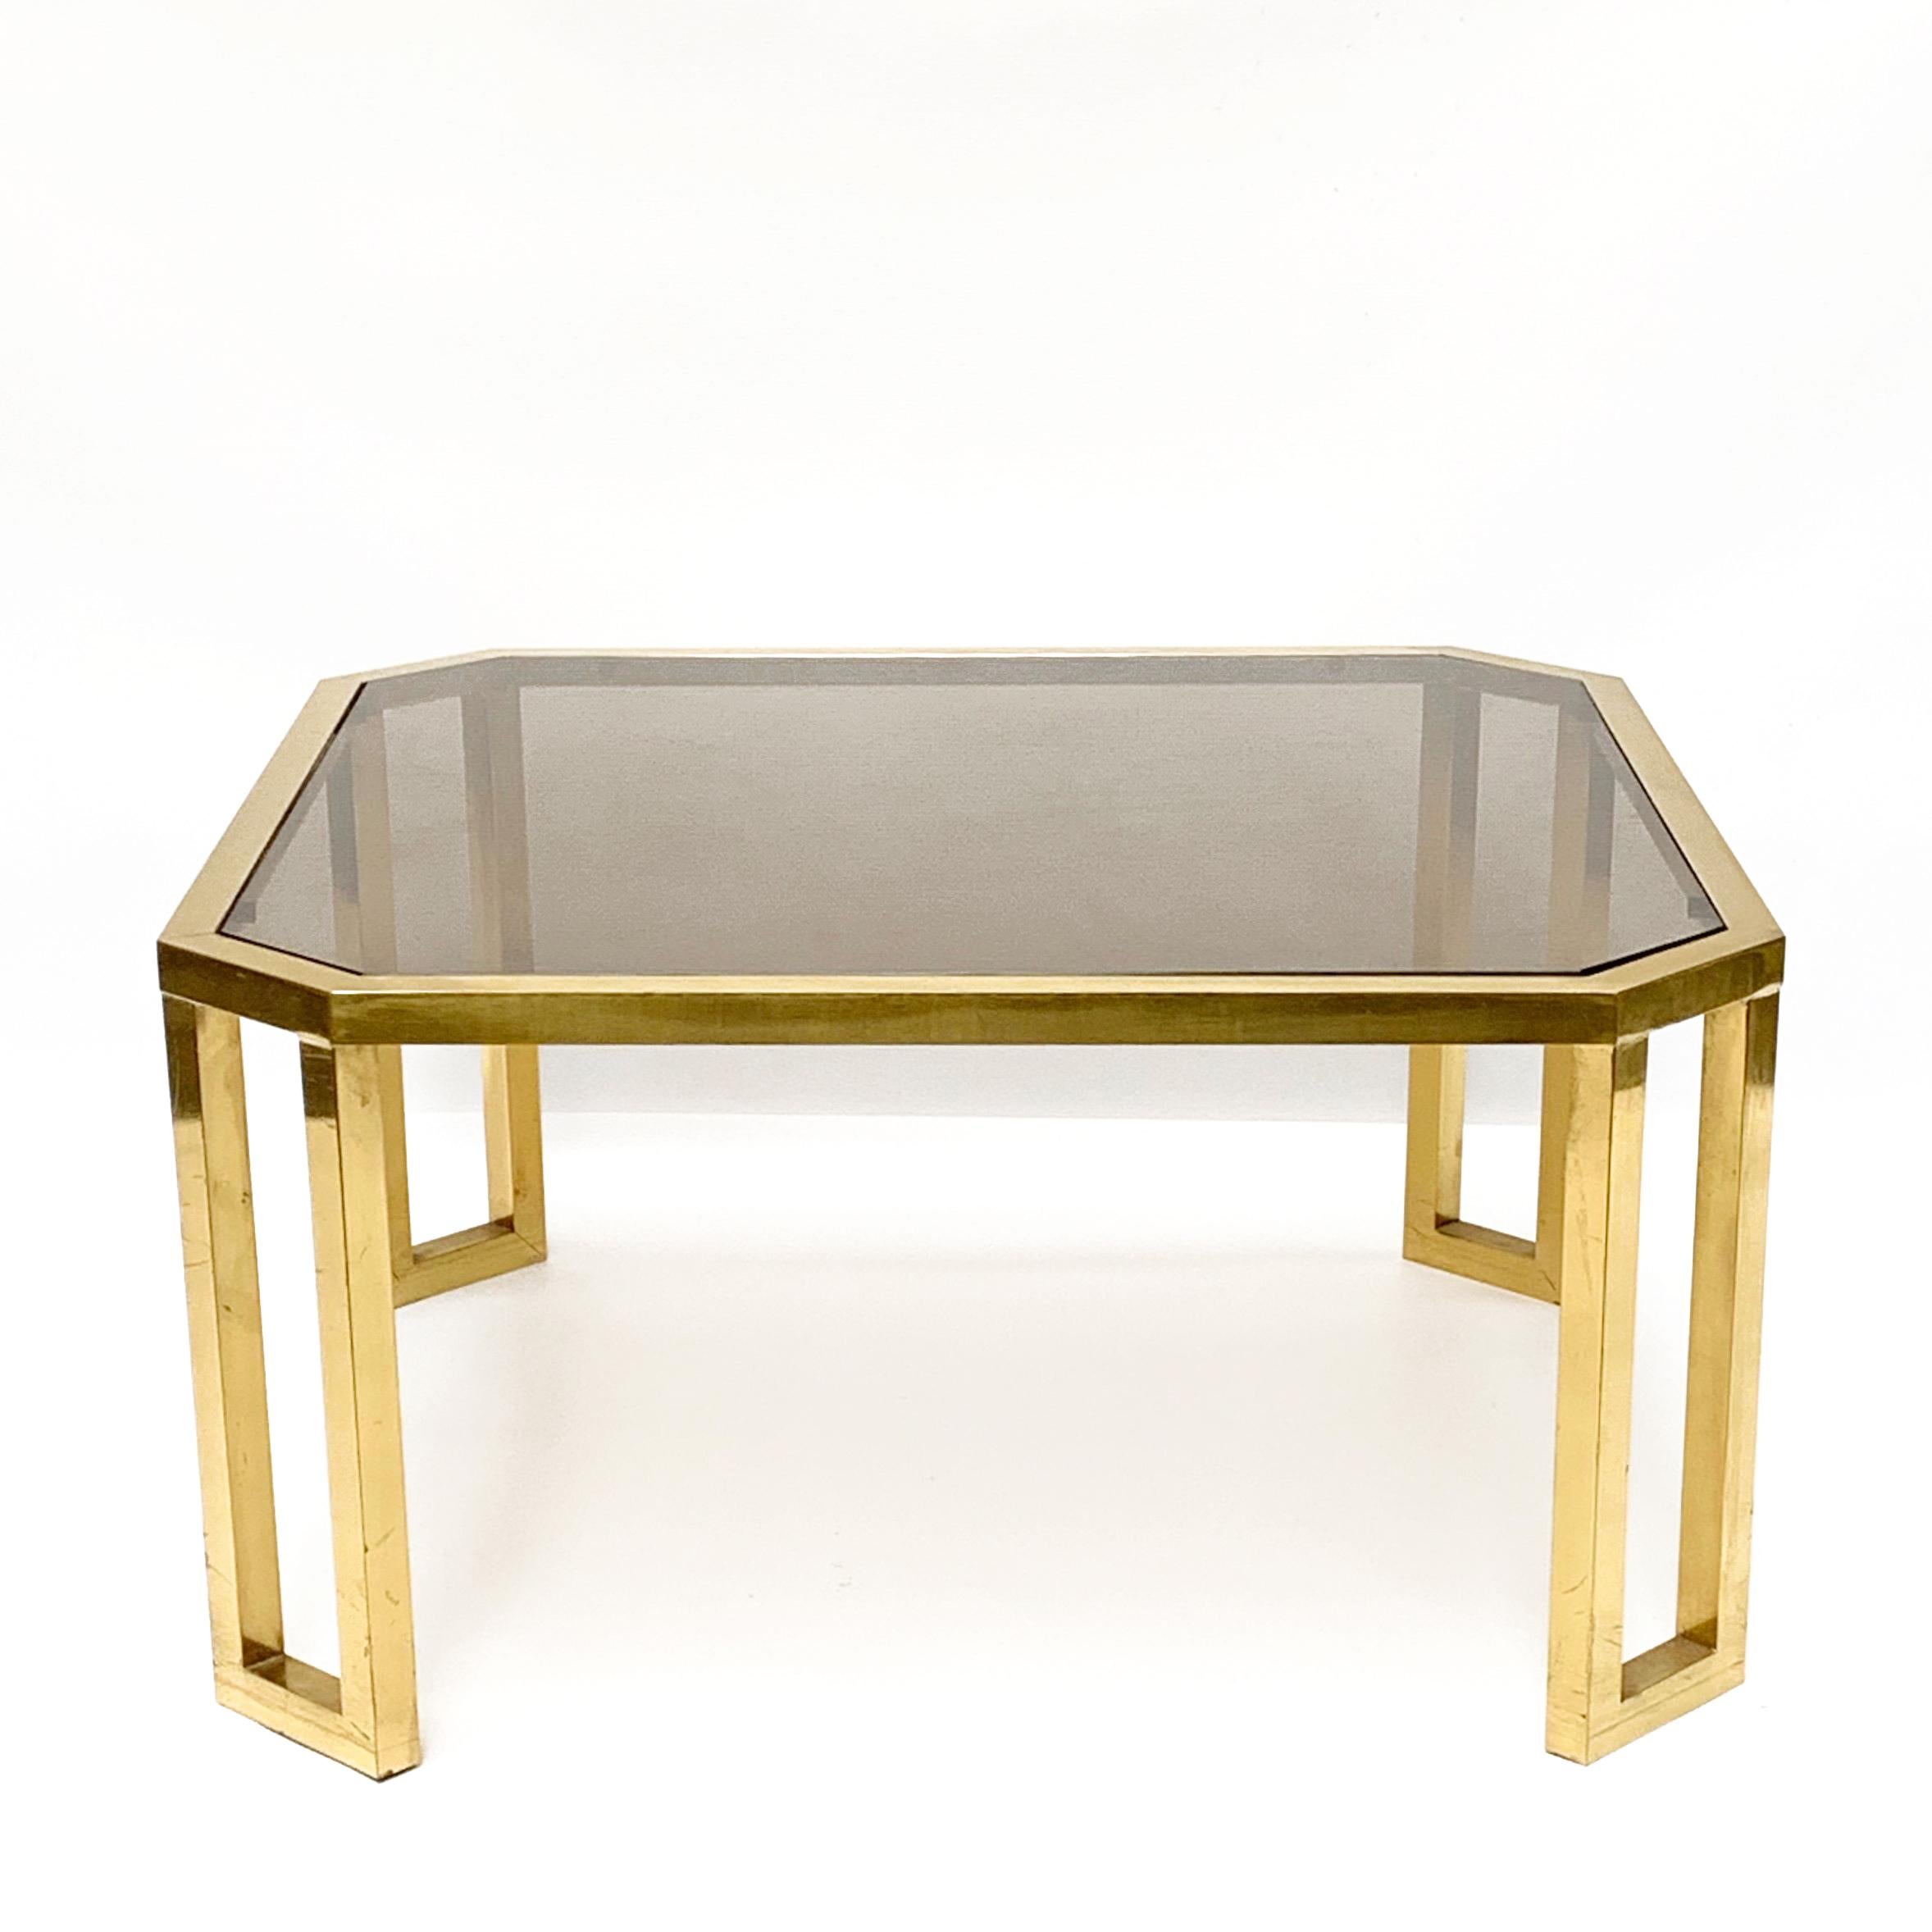 Maison Jansen Octagonal Tables in Brass and Glass, France, 1970s Coffee Tables For Sale 5